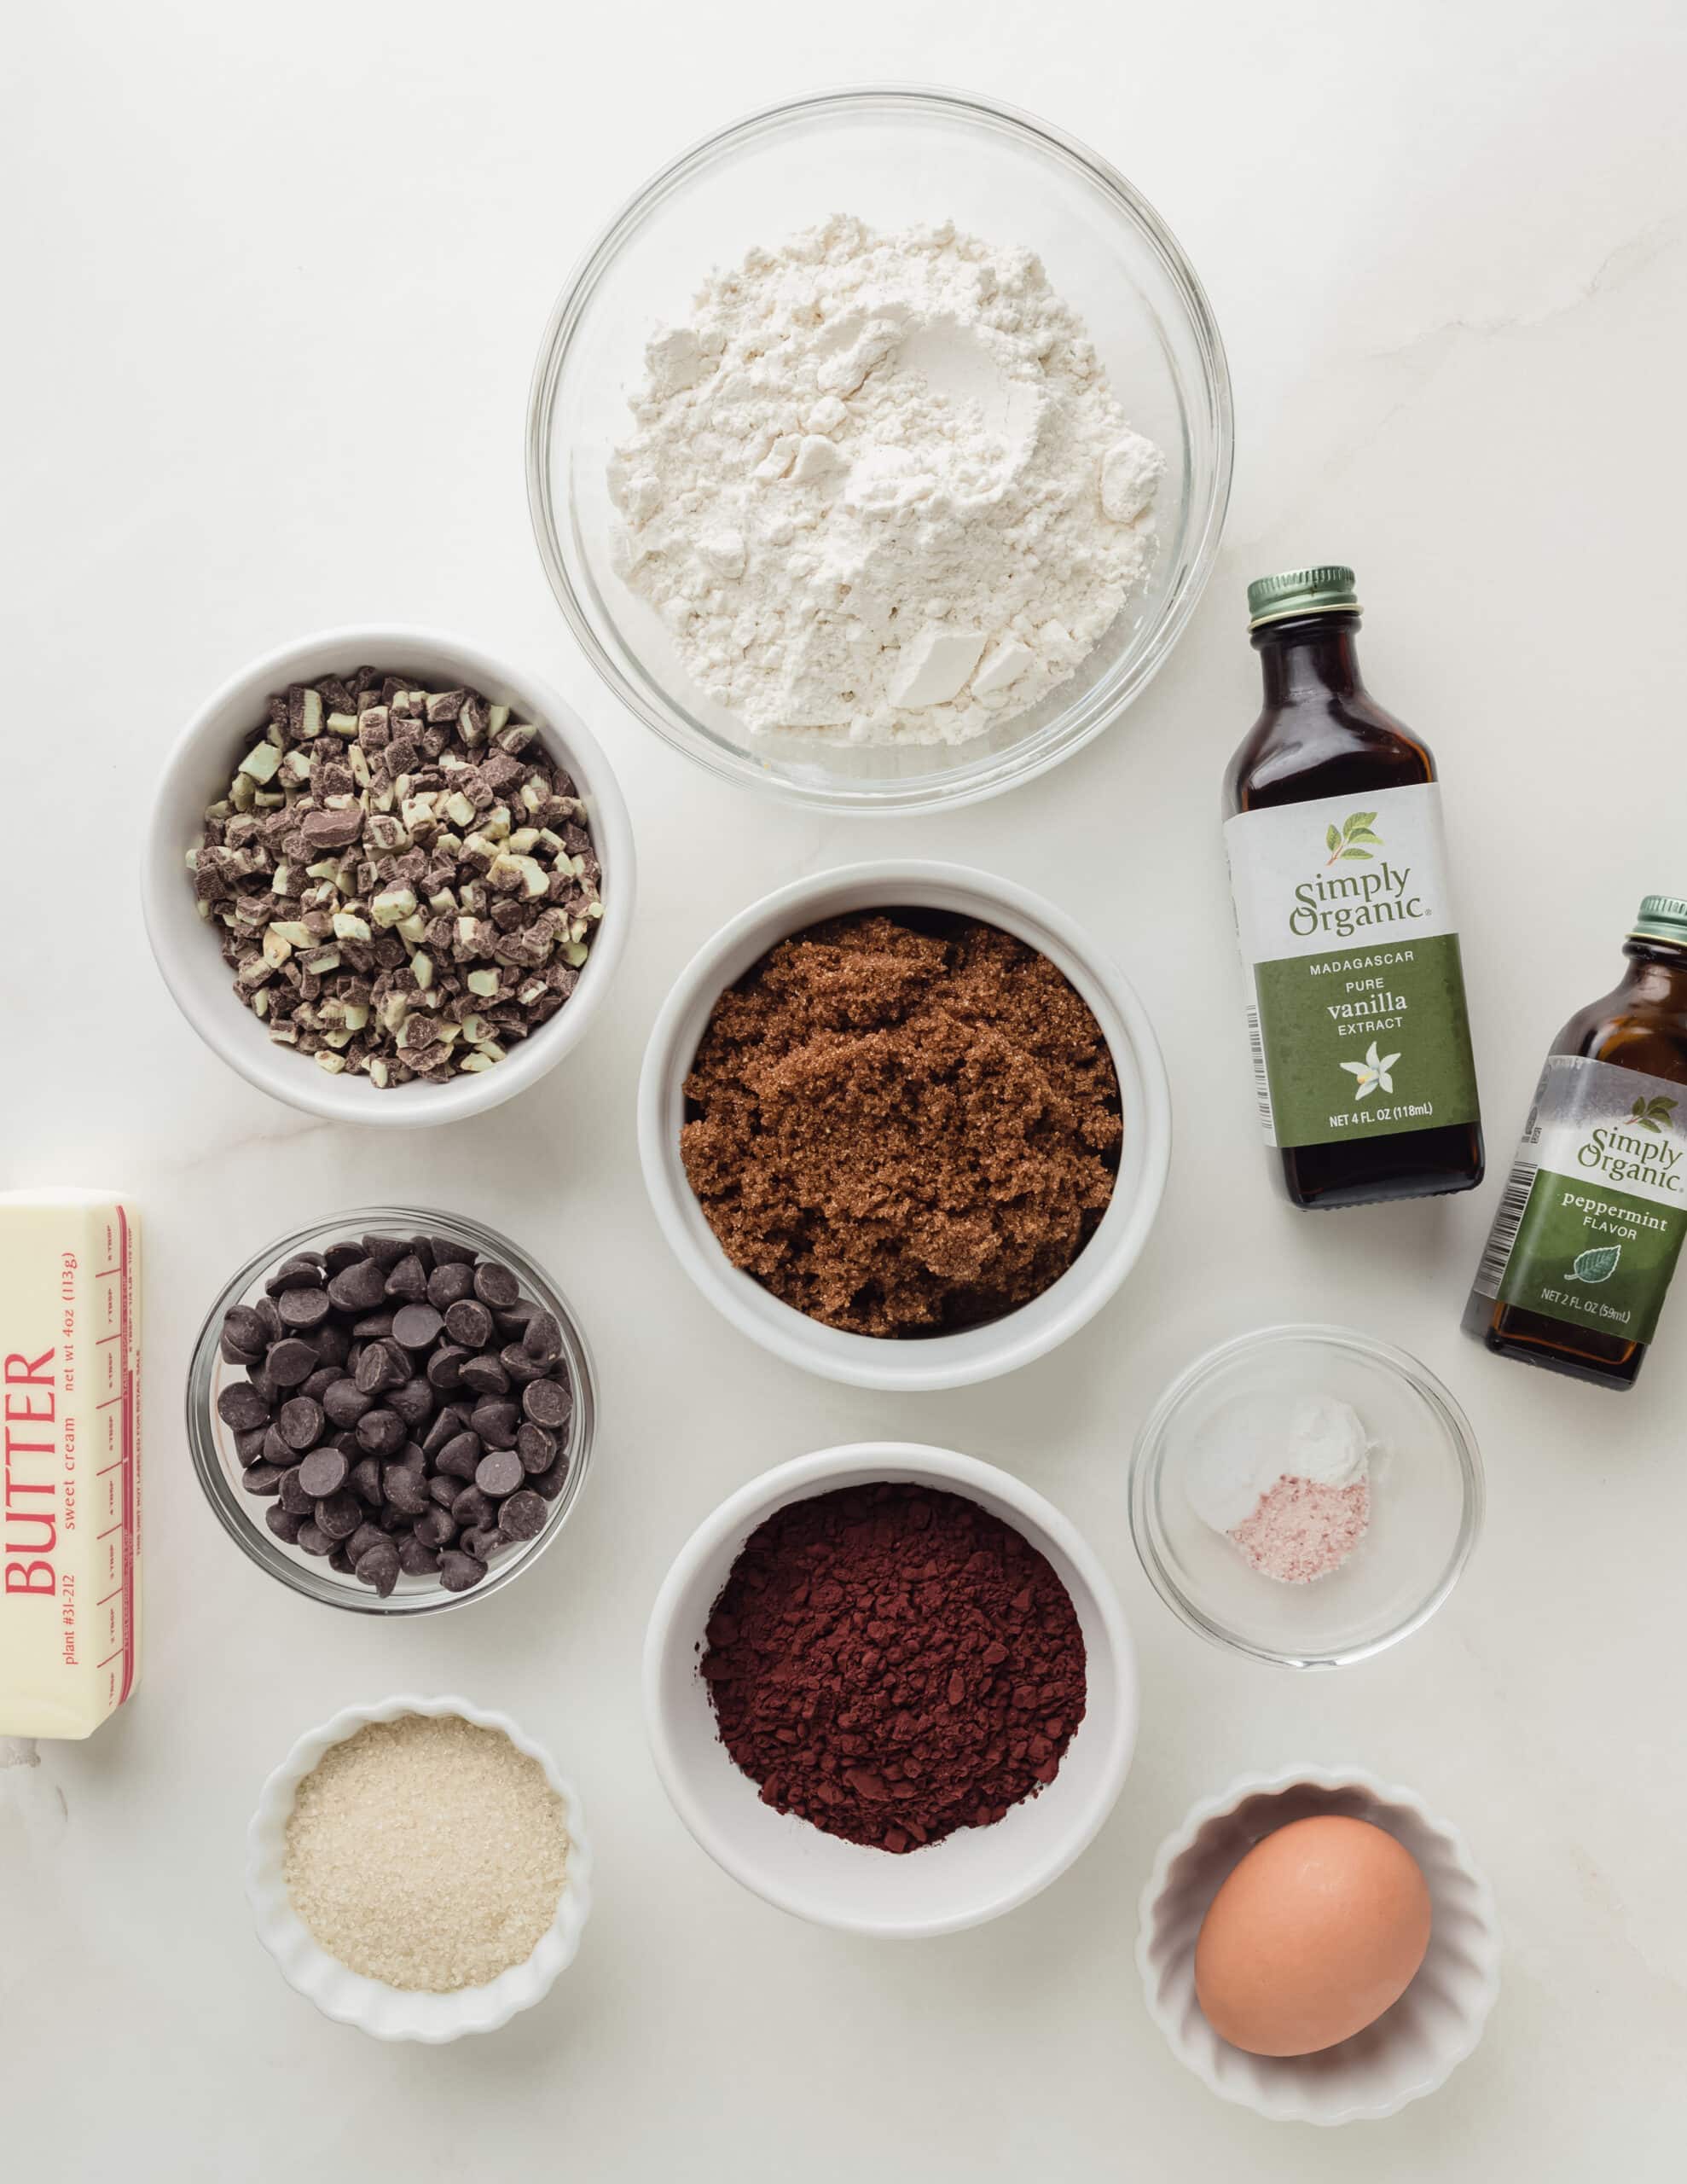 A photo showing all of the Ingredients for mint chocolate cookies.